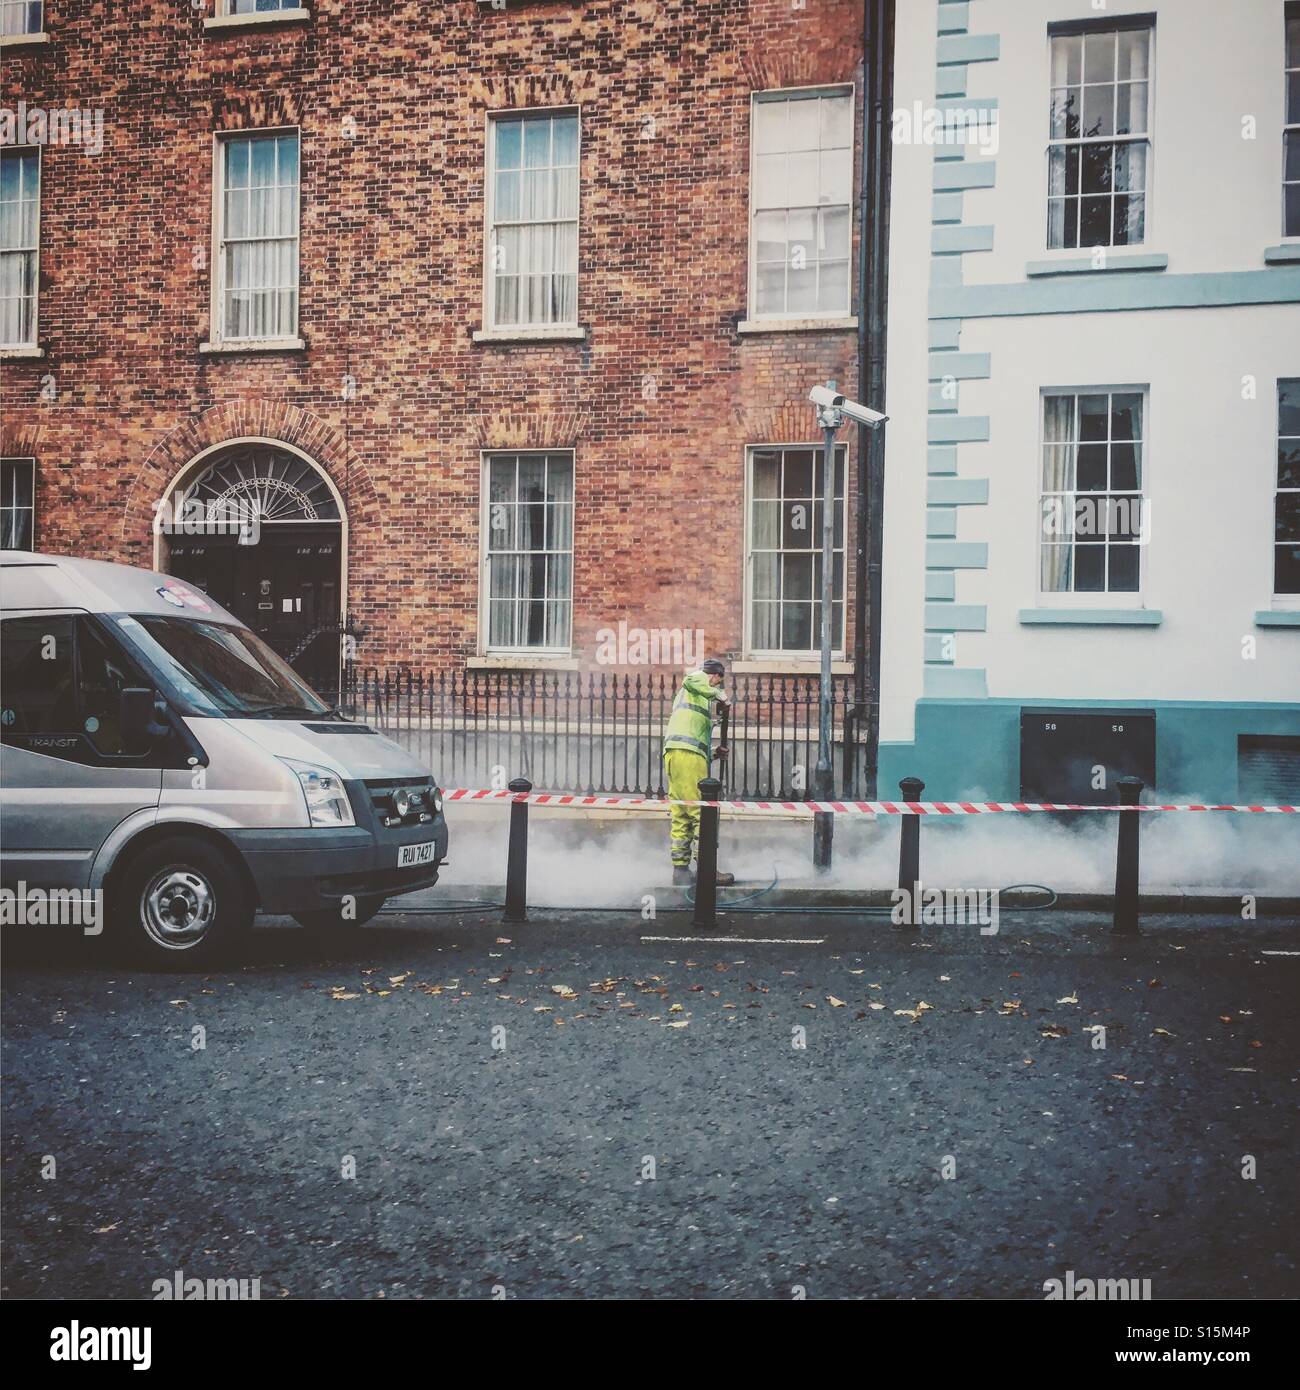 The Bubblegum Man removing chewing gum off the streets in the city. Stock Photo